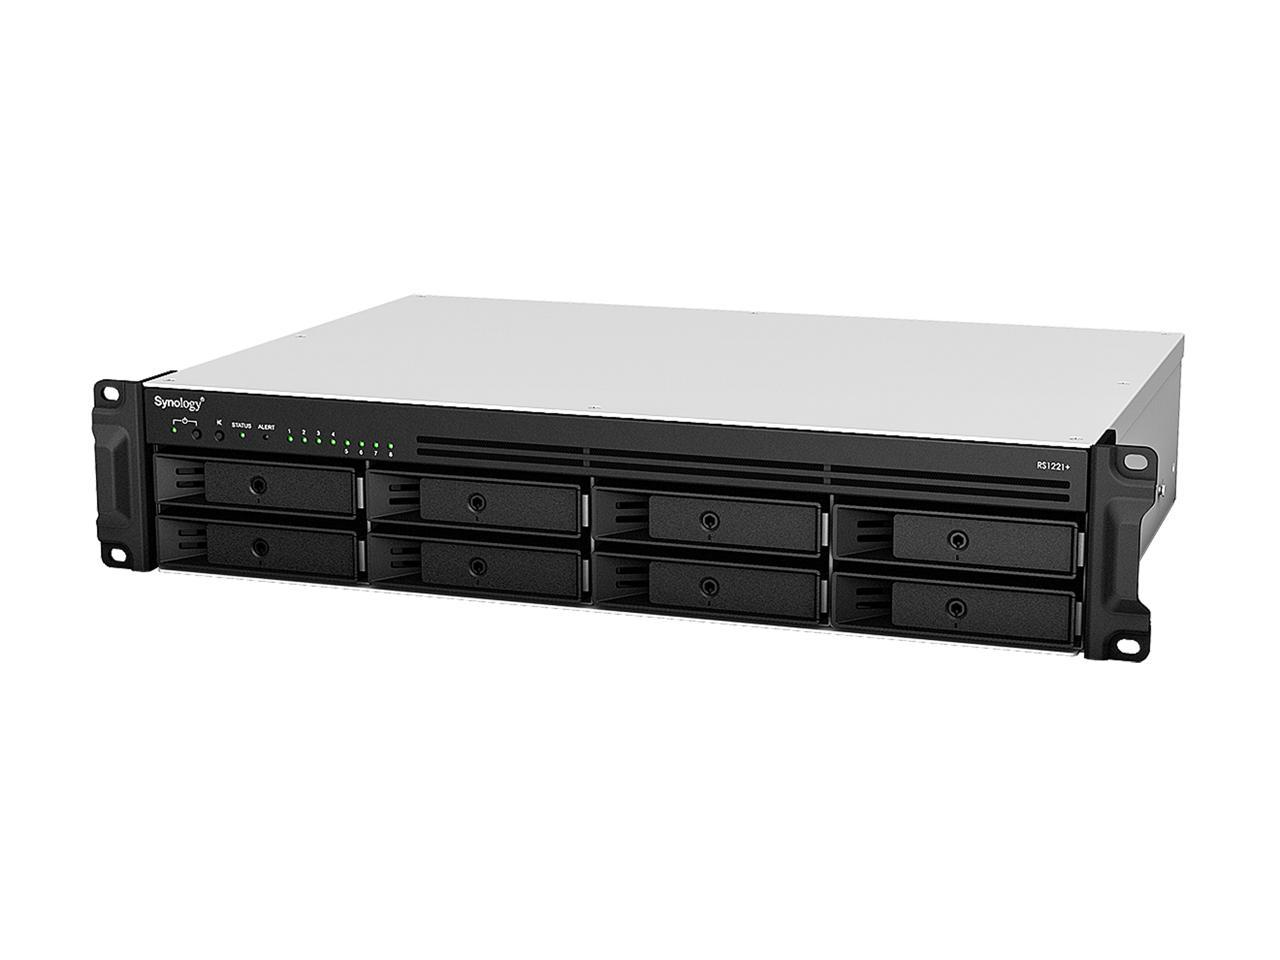 Synology RS1221+ RackStation with 32GB RAM 800GB (2x400GB) Cache, 1-Port 10GbE Adapter and 48TB (8 x 6TB) of Synology Plus NAS Drives Fully Assembled and Tested